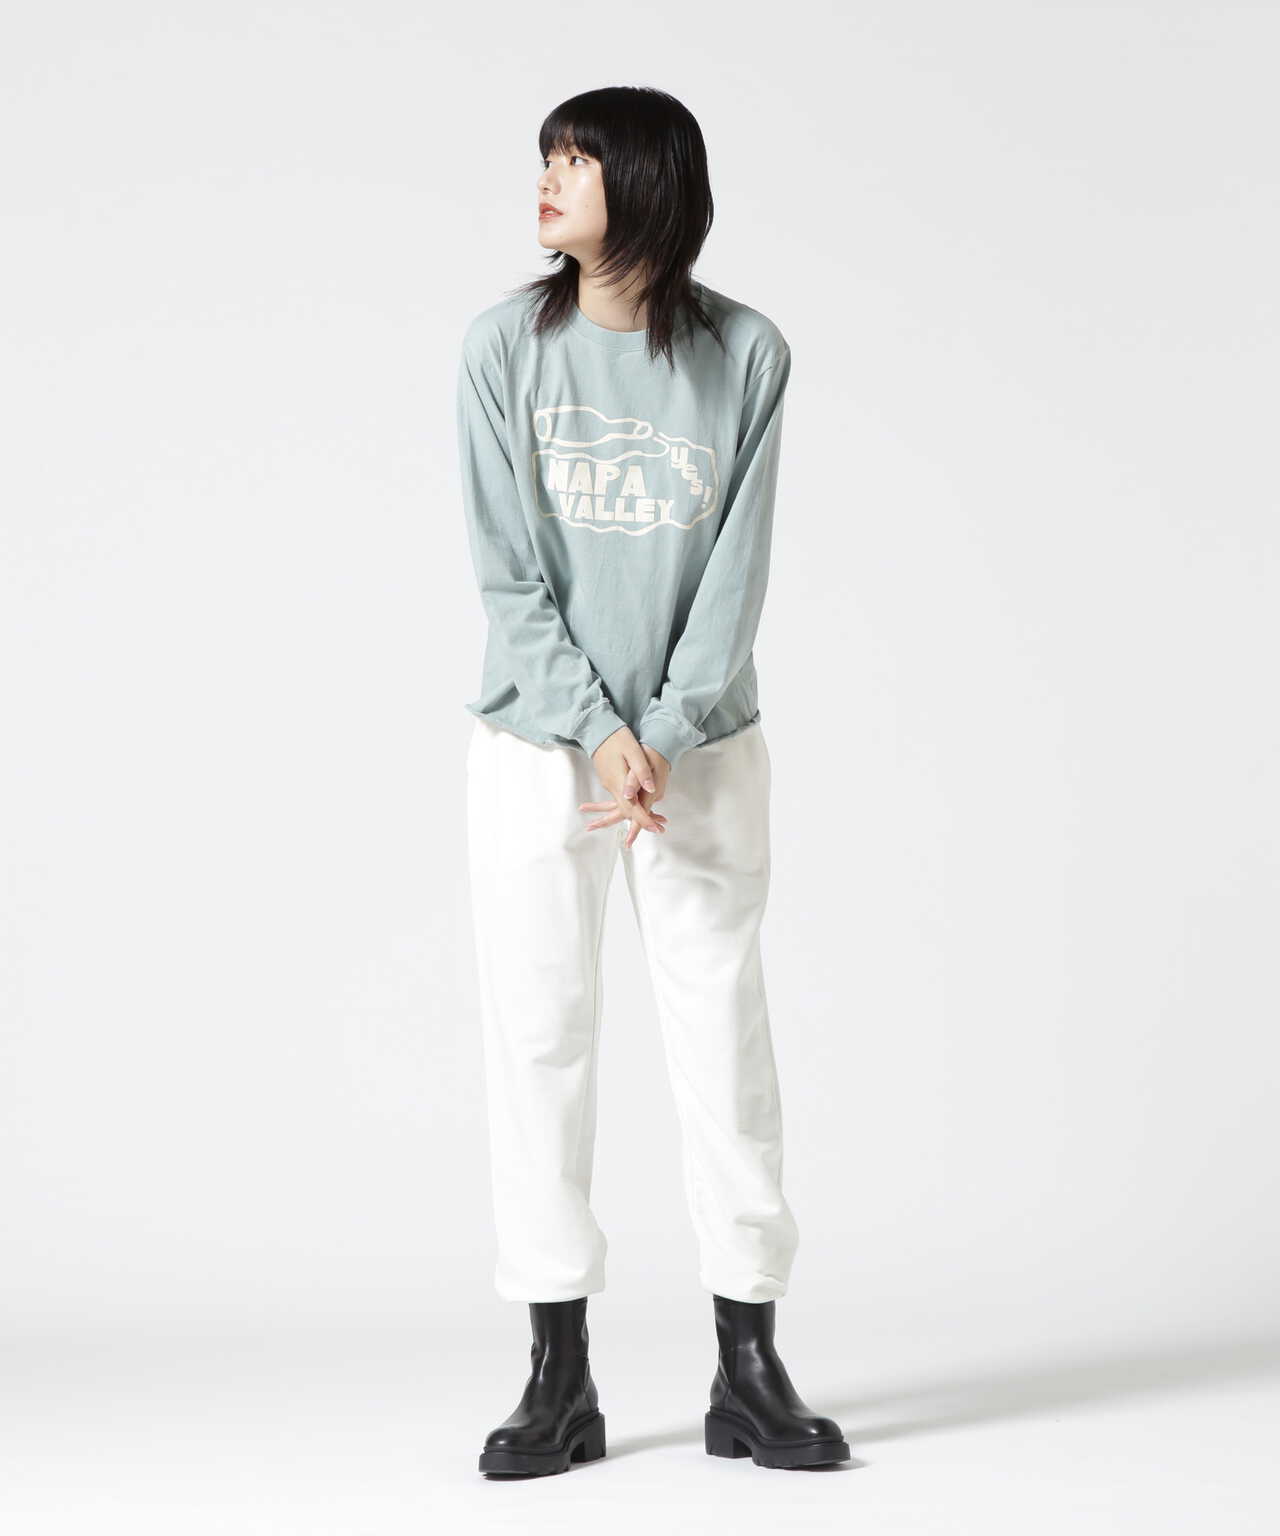 THE DAY ON THE BEACH/ザデイオンザビーチ CUT OFF L/S TEE NAPA